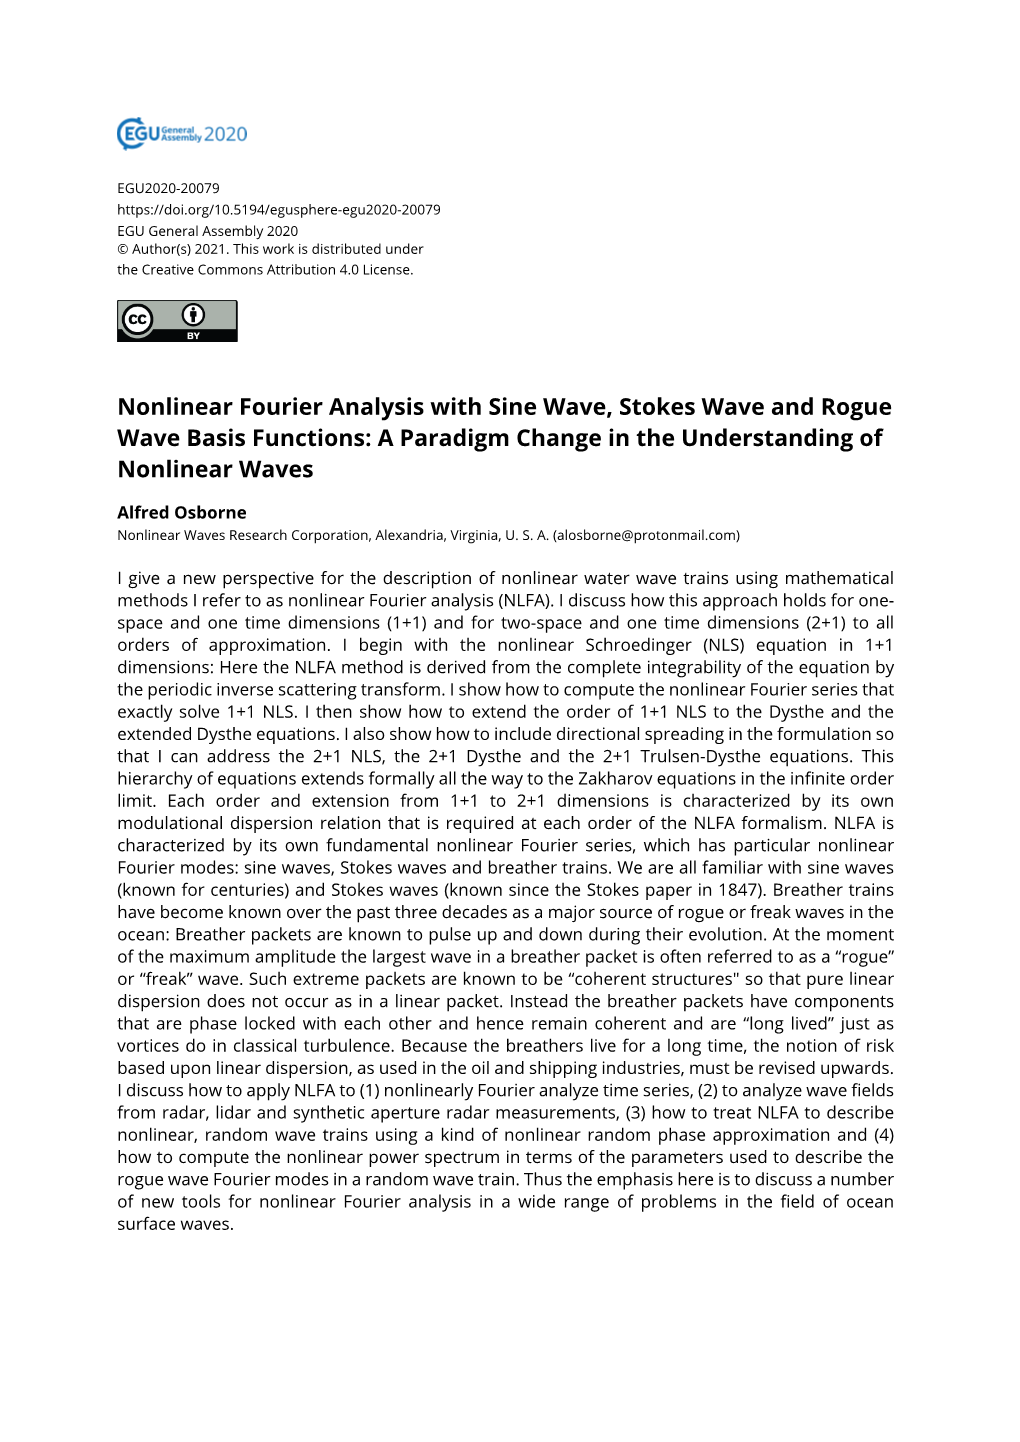 Nonlinear Fourier Analysis with Sine Wave, Stokes Wave and Rogue Wave Basis Functions: a Paradigm Change in the Understanding of Nonlinear Waves